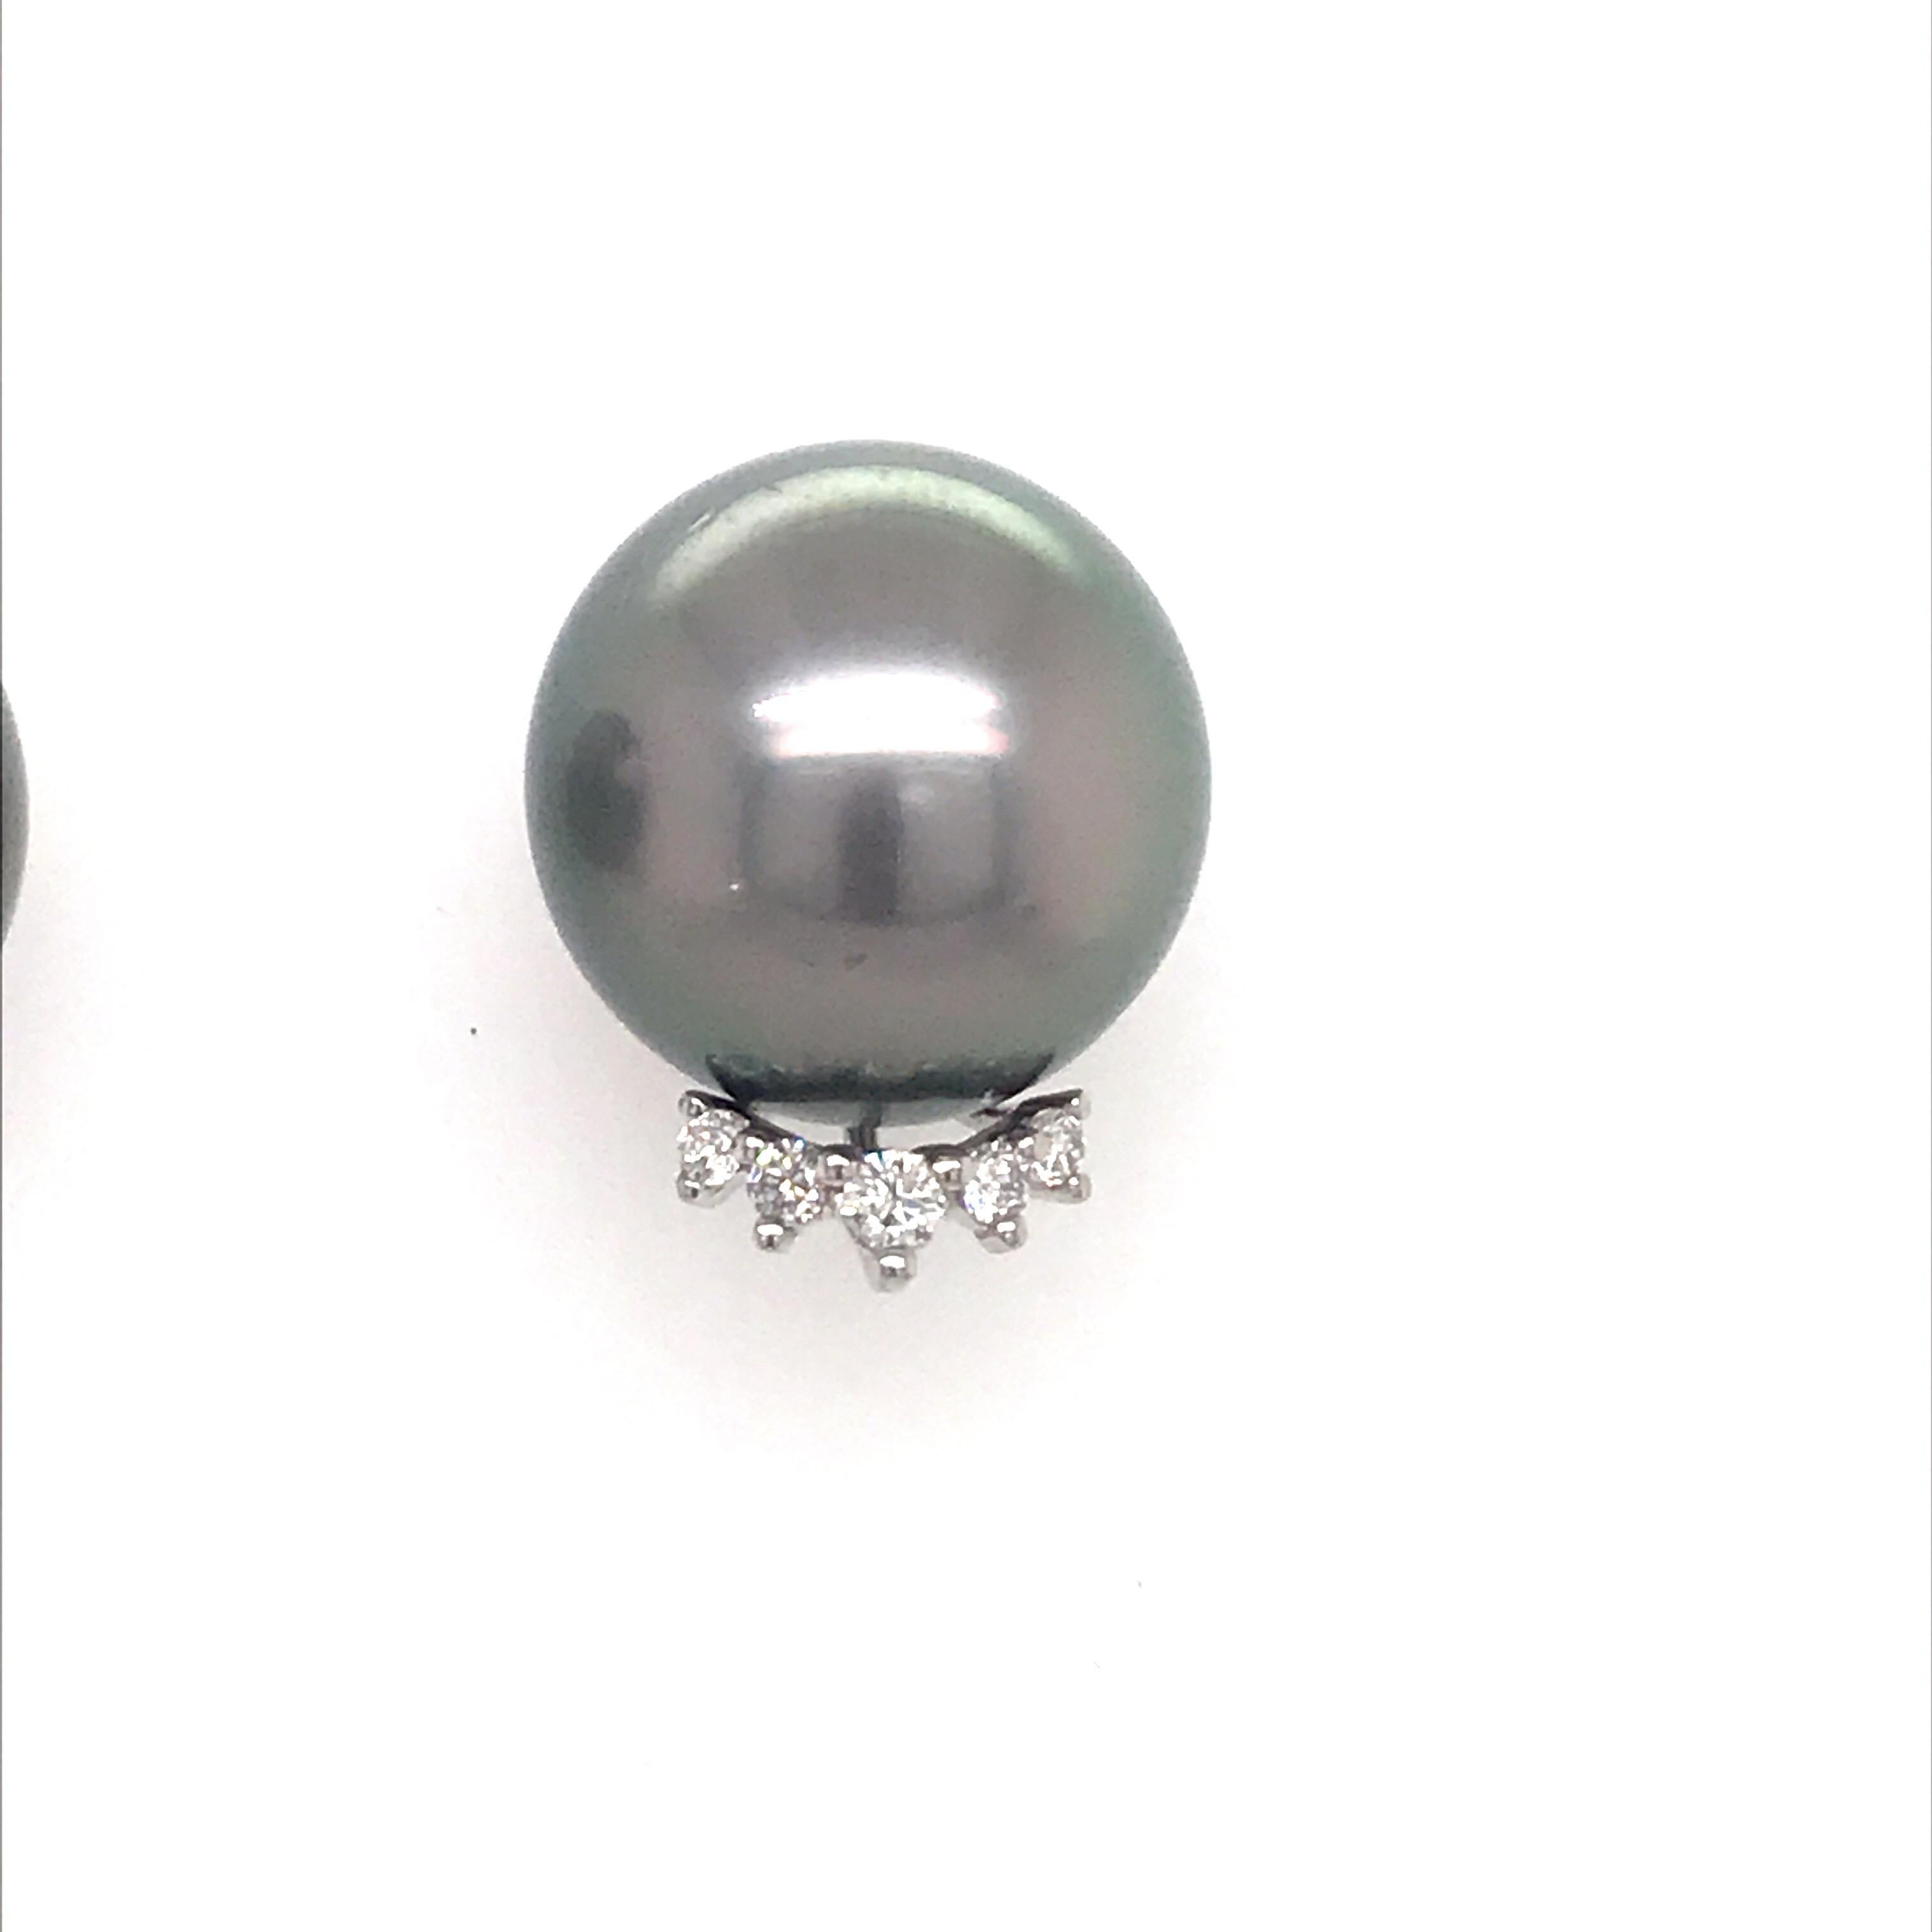 18K White gold stud earrings featuring two grey Tahitian pearls measuring 14-15 mm flanked with 10 round brilliants weighing 0.24 carats.
Color G-H
Clarity SI